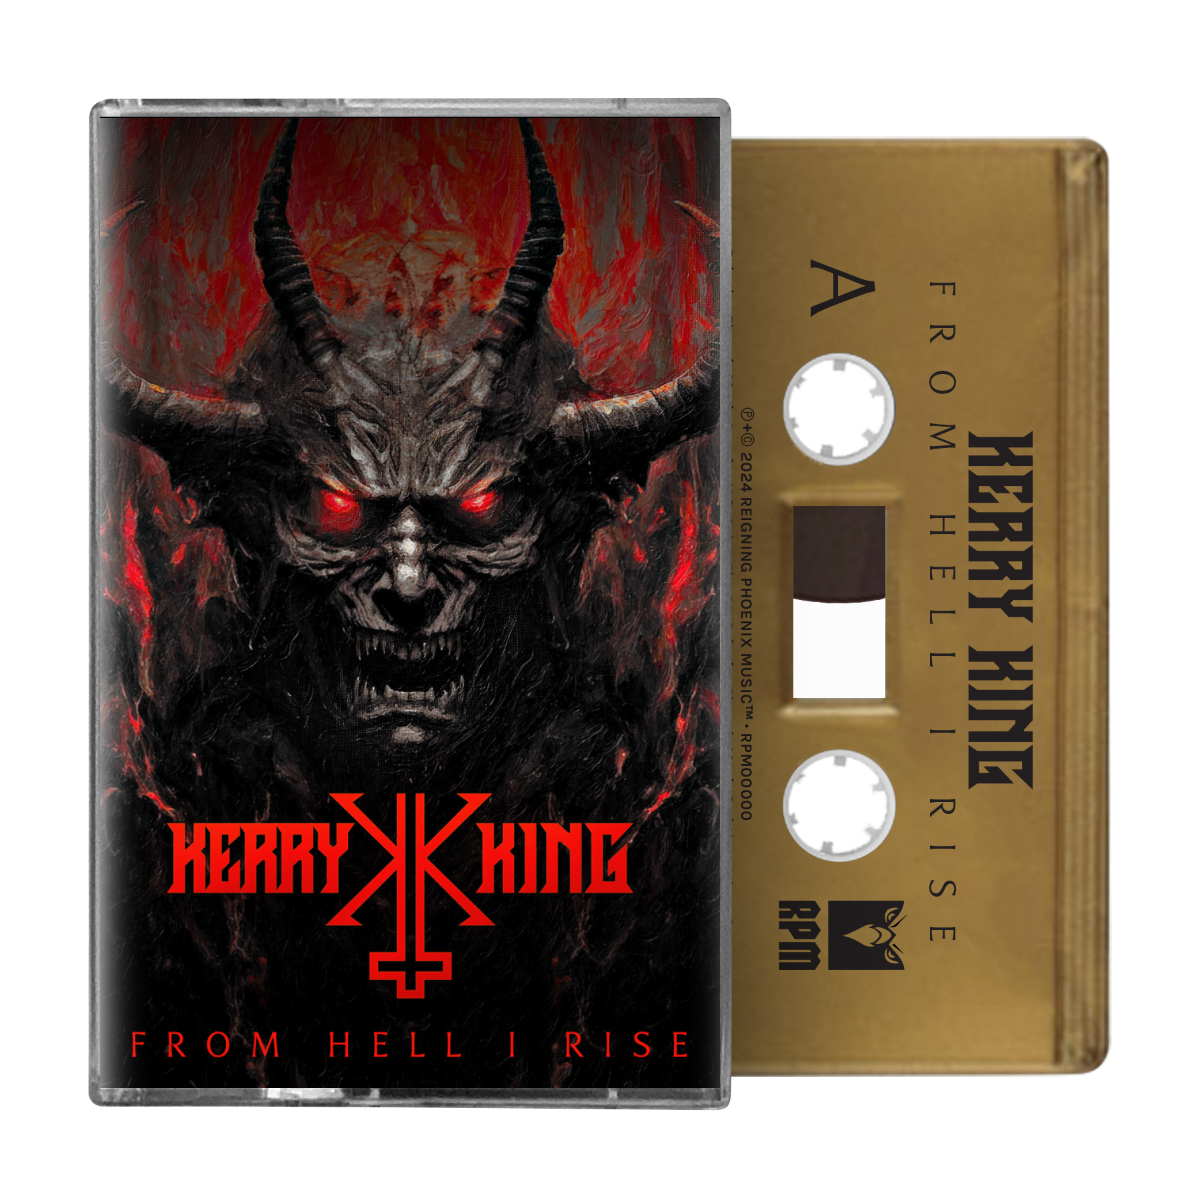 Kerry King | From Hell I Rise (Colored Cassette, Gold) | Cassette